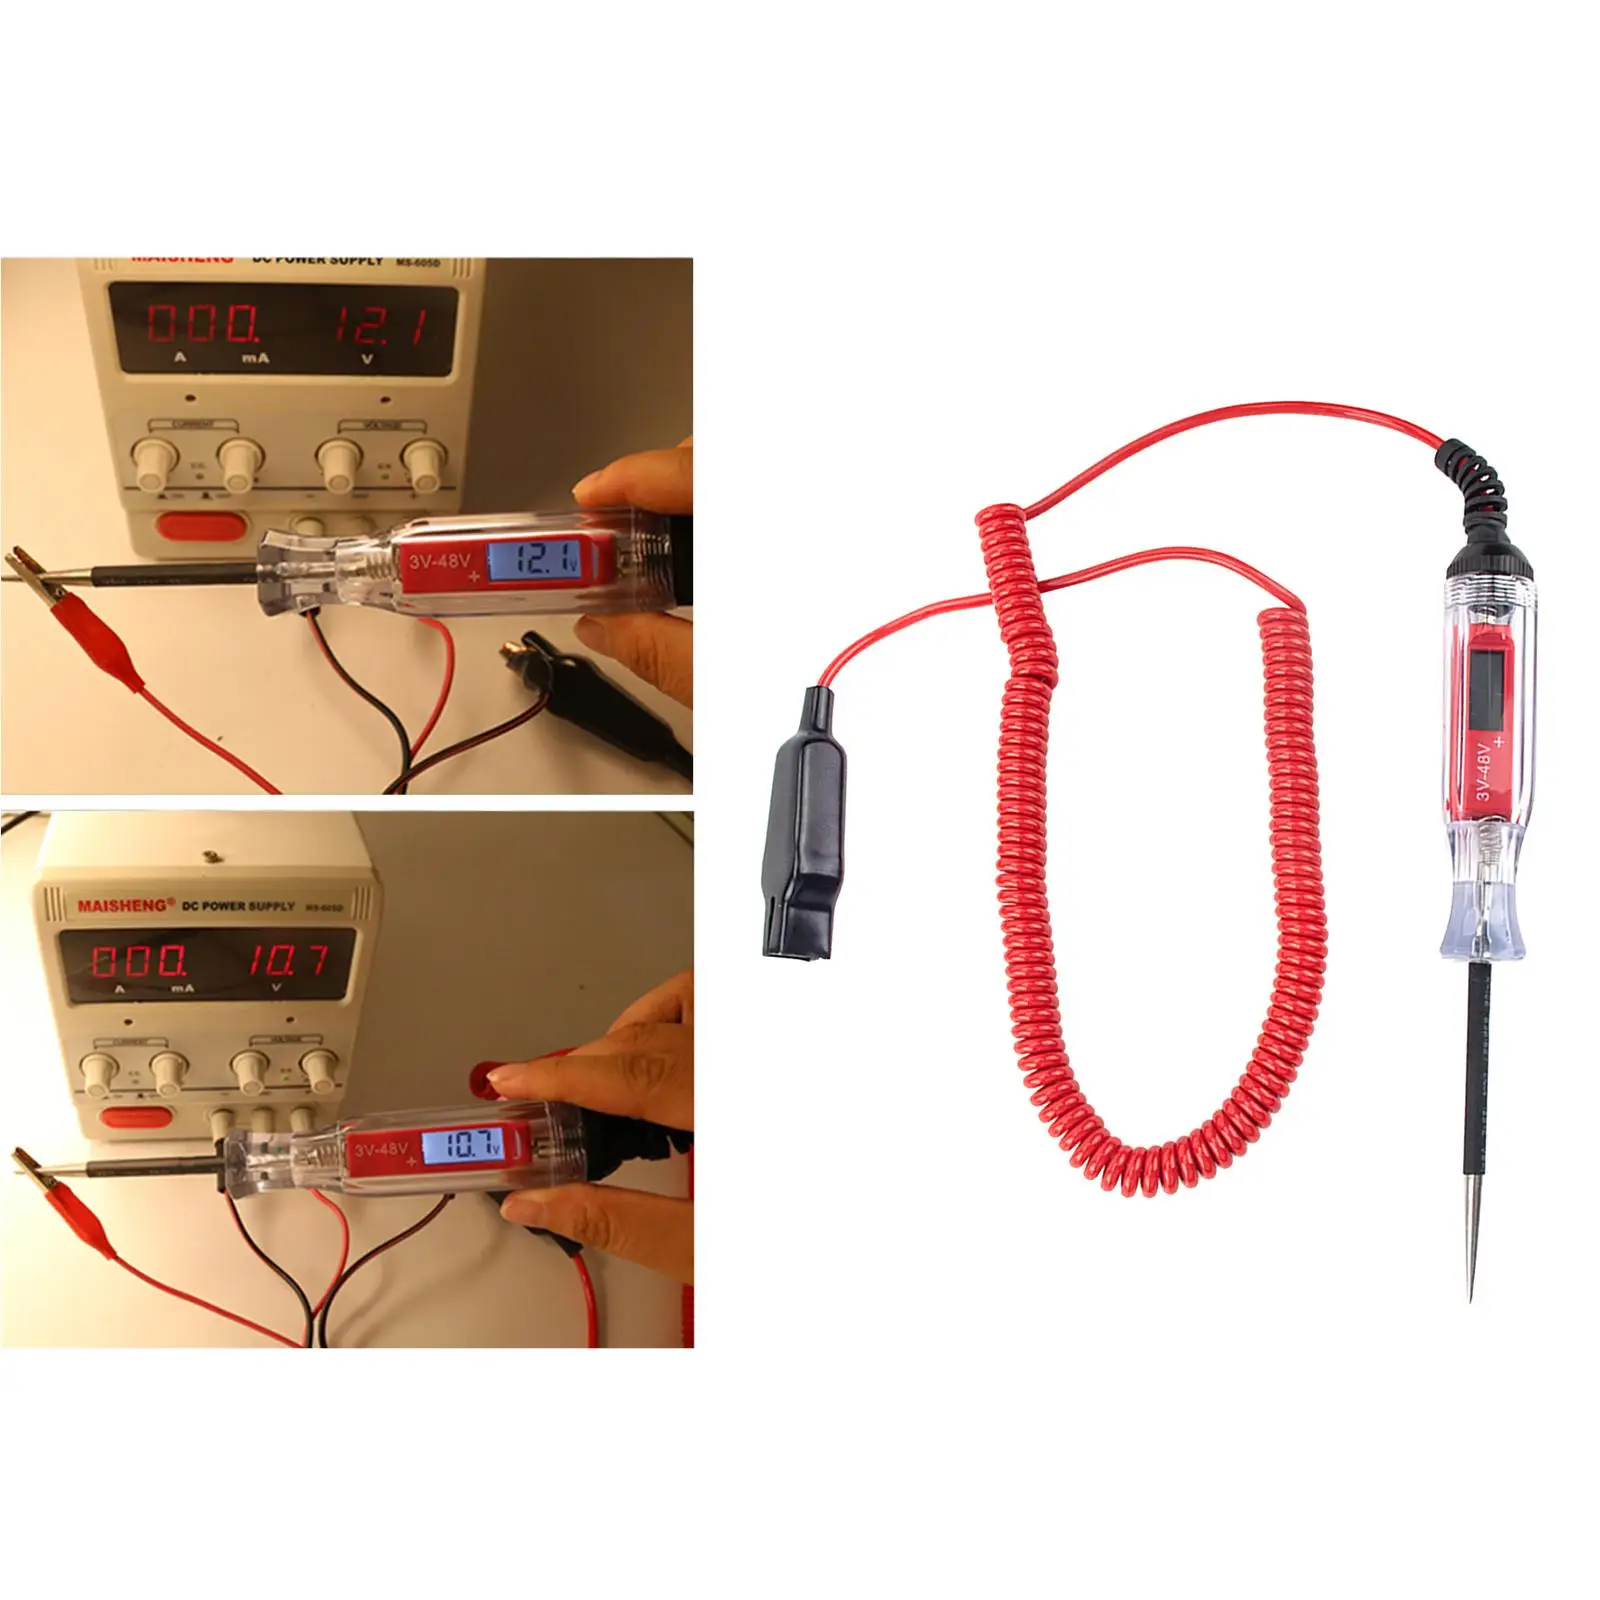 Heavy Duty Automotive Circuit Tester, Professional Circuit Tester Light, Extended Test Leads, Long Probe for Car Voltage